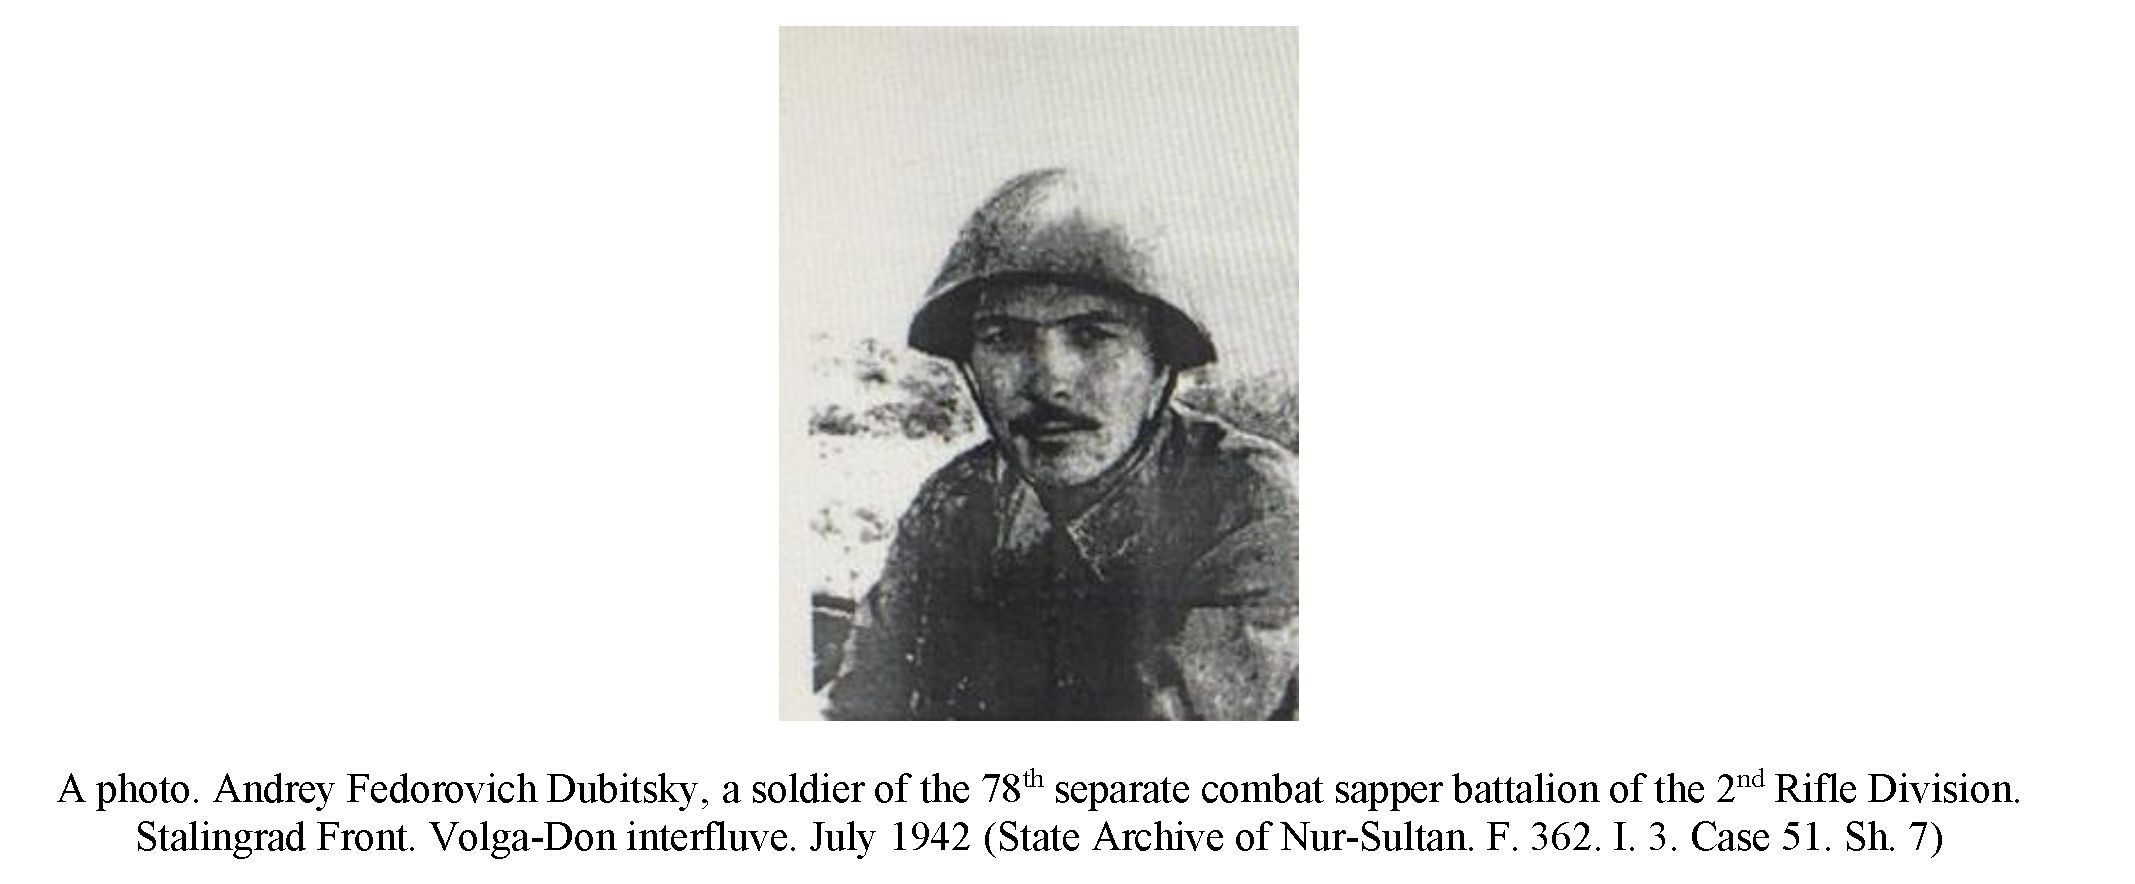 A.F. Dubitsky as a sapper of the 29th Rifle Division: highlights of biography and frontline life (based on the materials of the archive of Nur-Sultan)